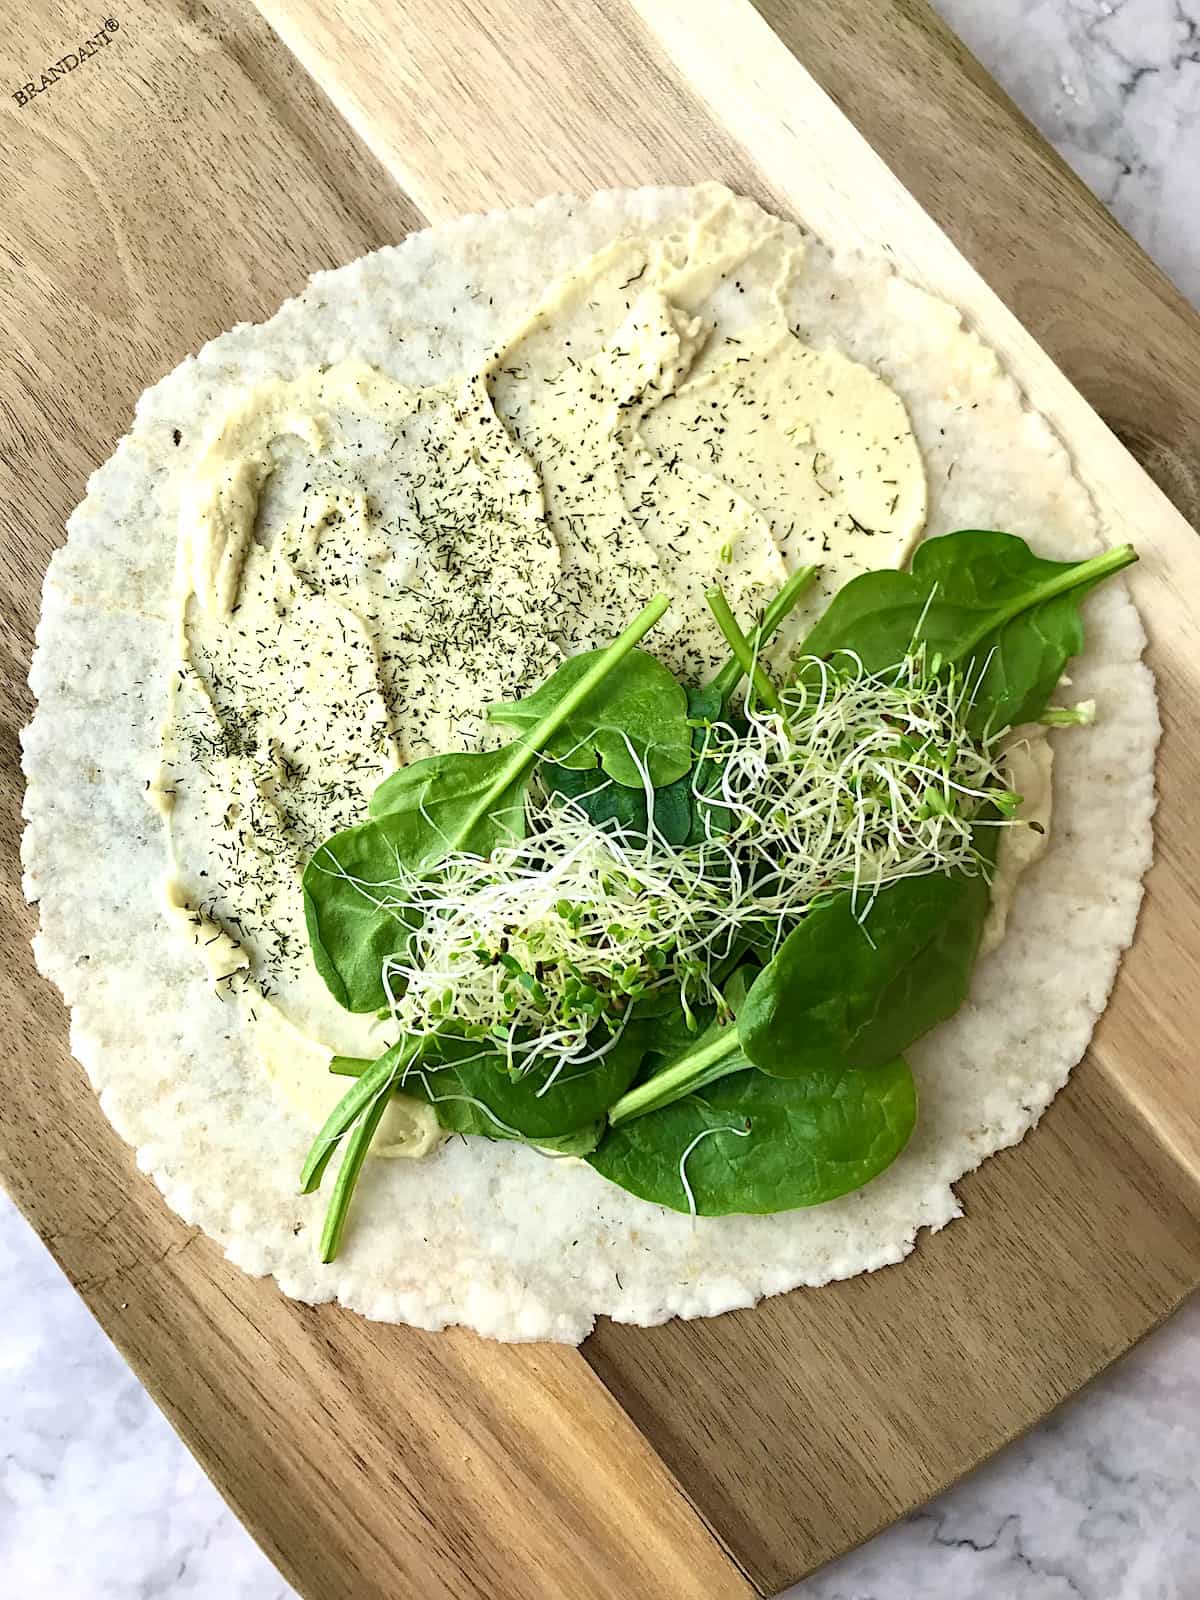 A tortilla topped with hummus, dill, spinach, and sprouts.